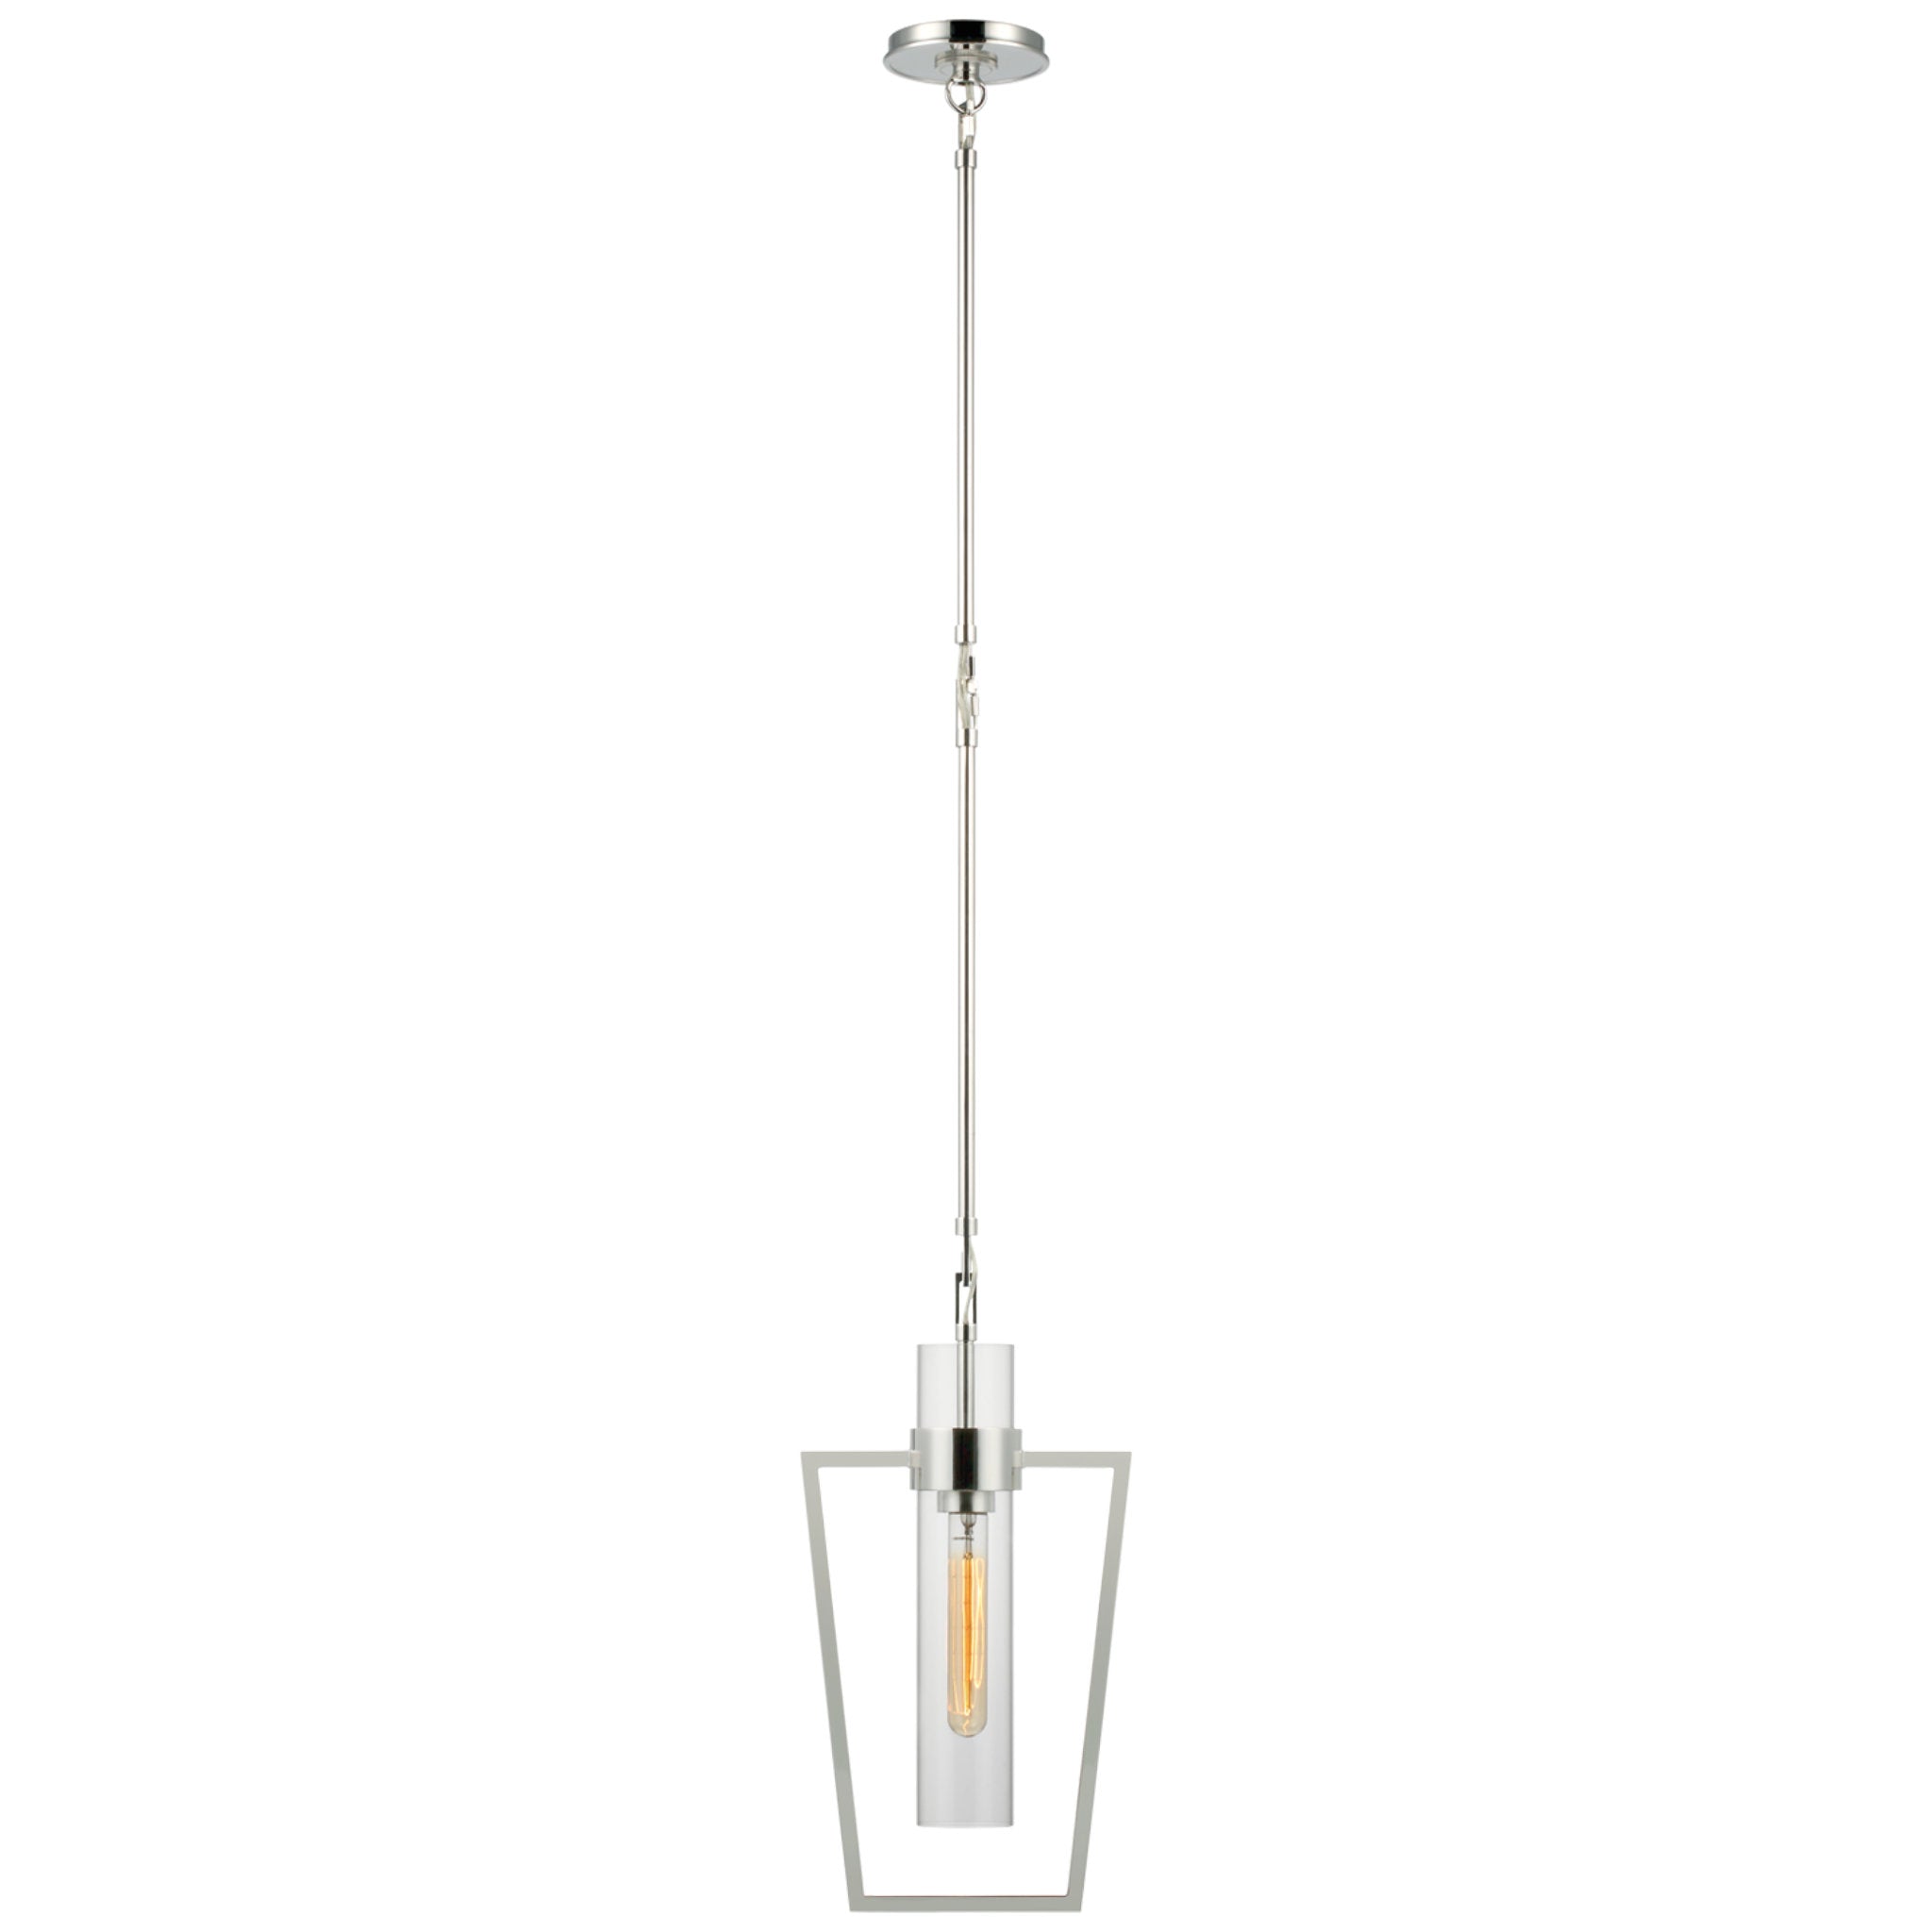 Ian K. Fowler Presidio Petite Caged Pendant in Polished Nickel with Clear Glass